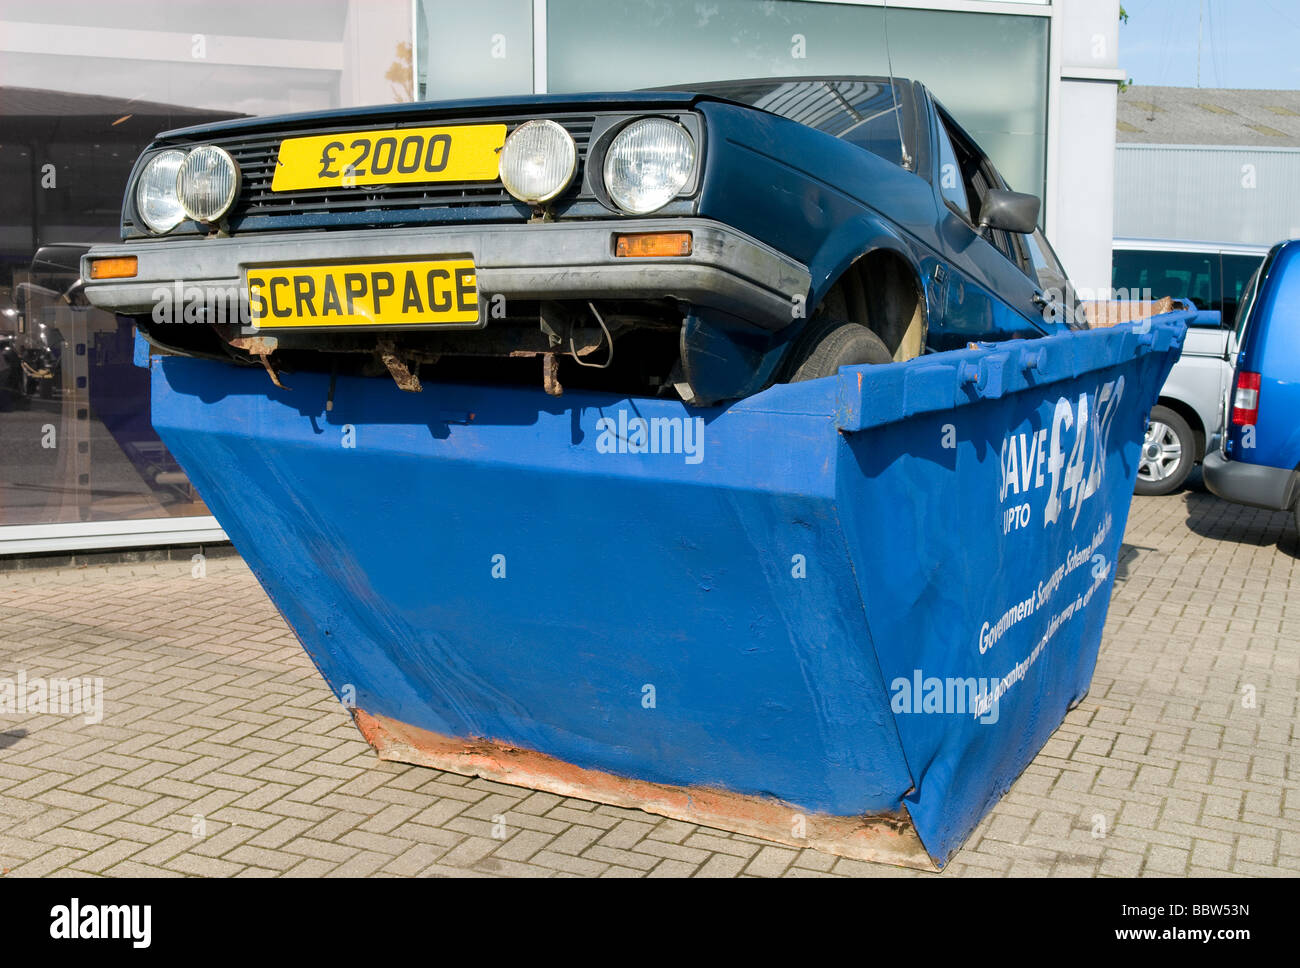 £2000 scrappage government incentive scheme, car in skip, norfolk, england Stock Photo